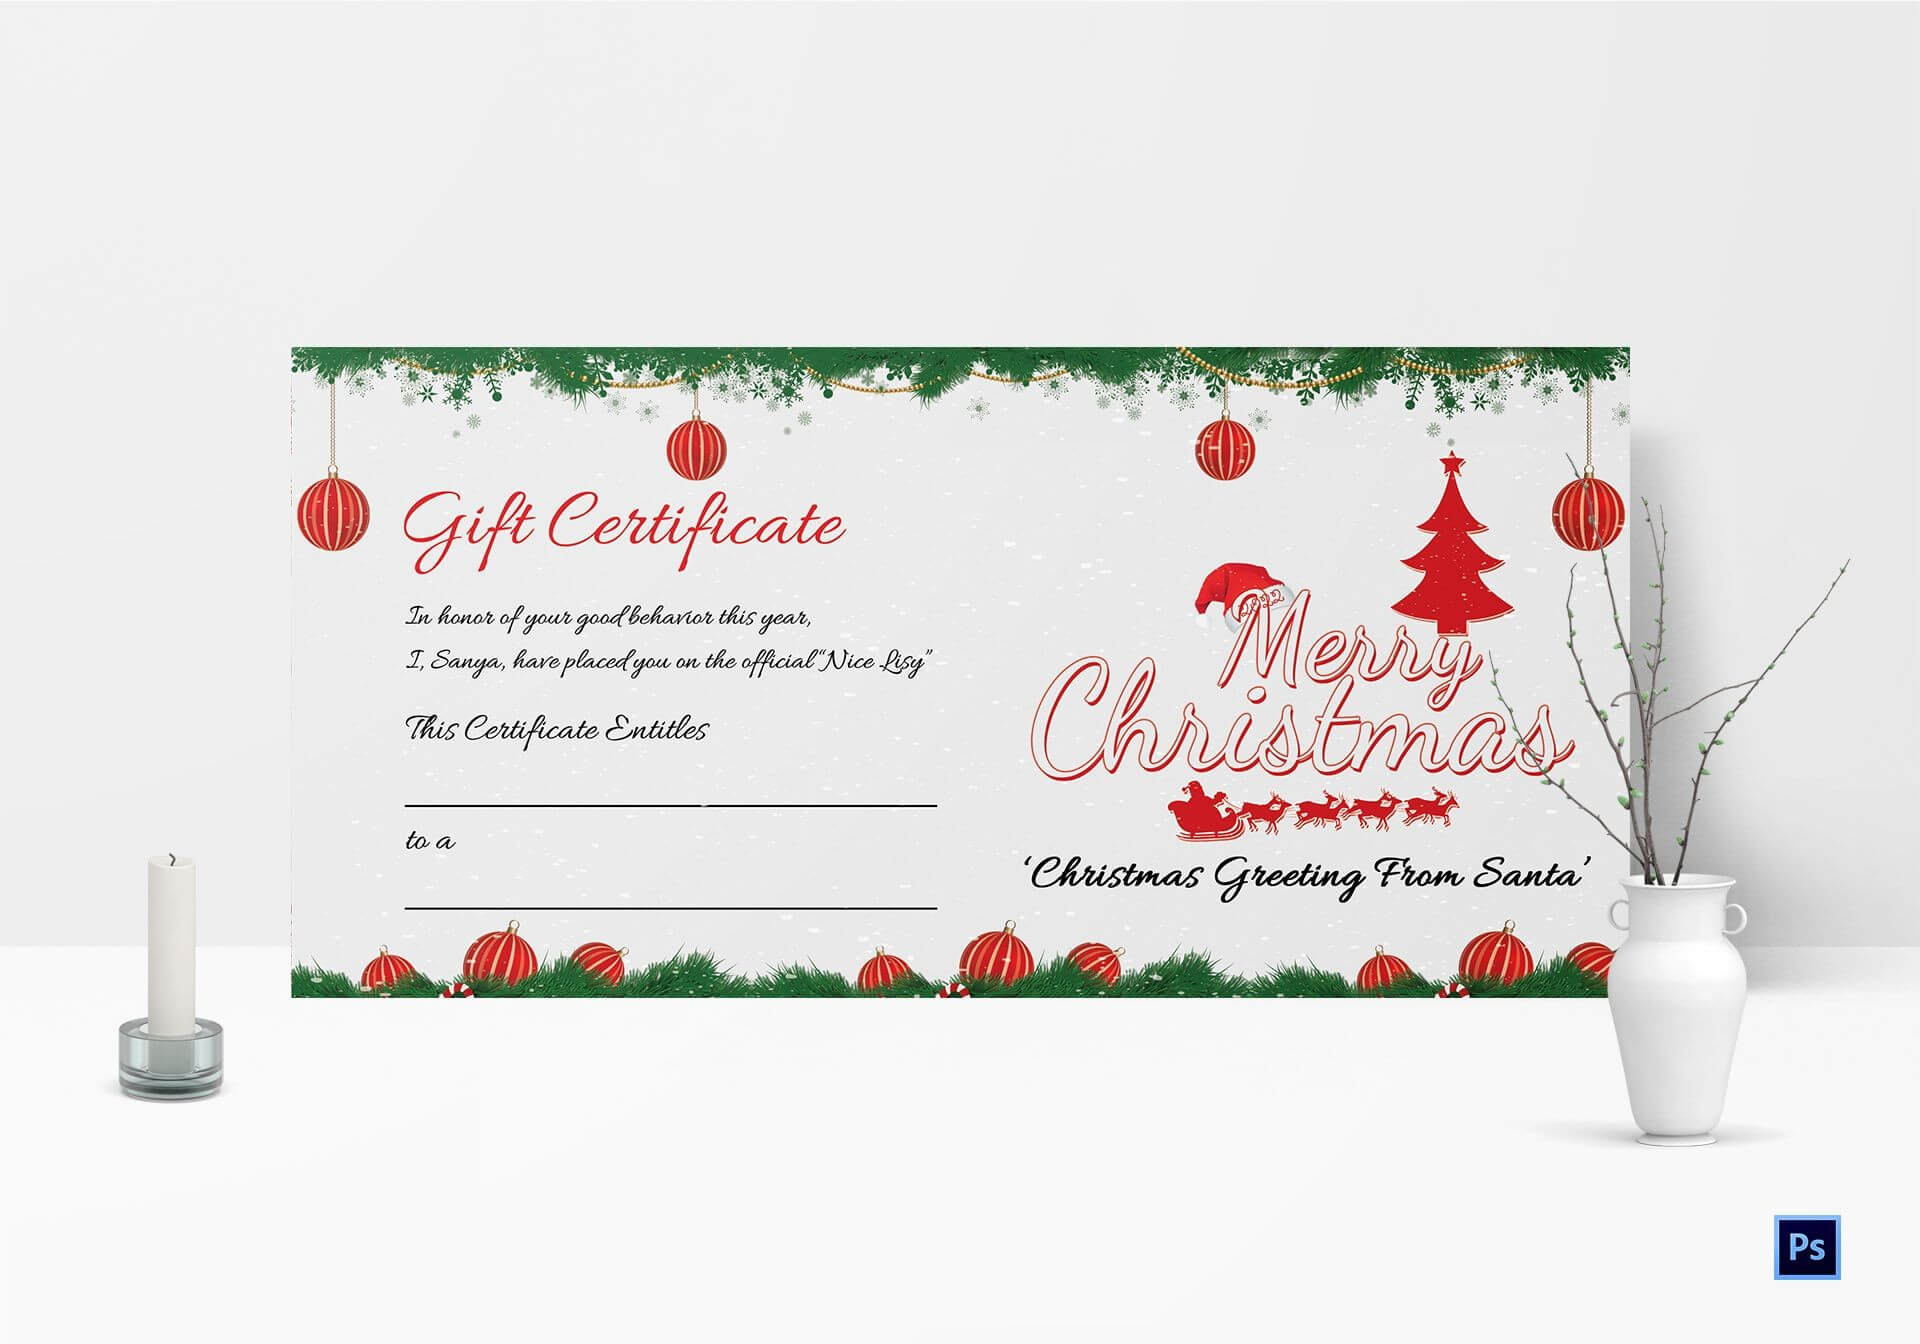 008 Template Ideas Photography Gift Certificate Photoshop Throughout Gift Certificate Template Photoshop